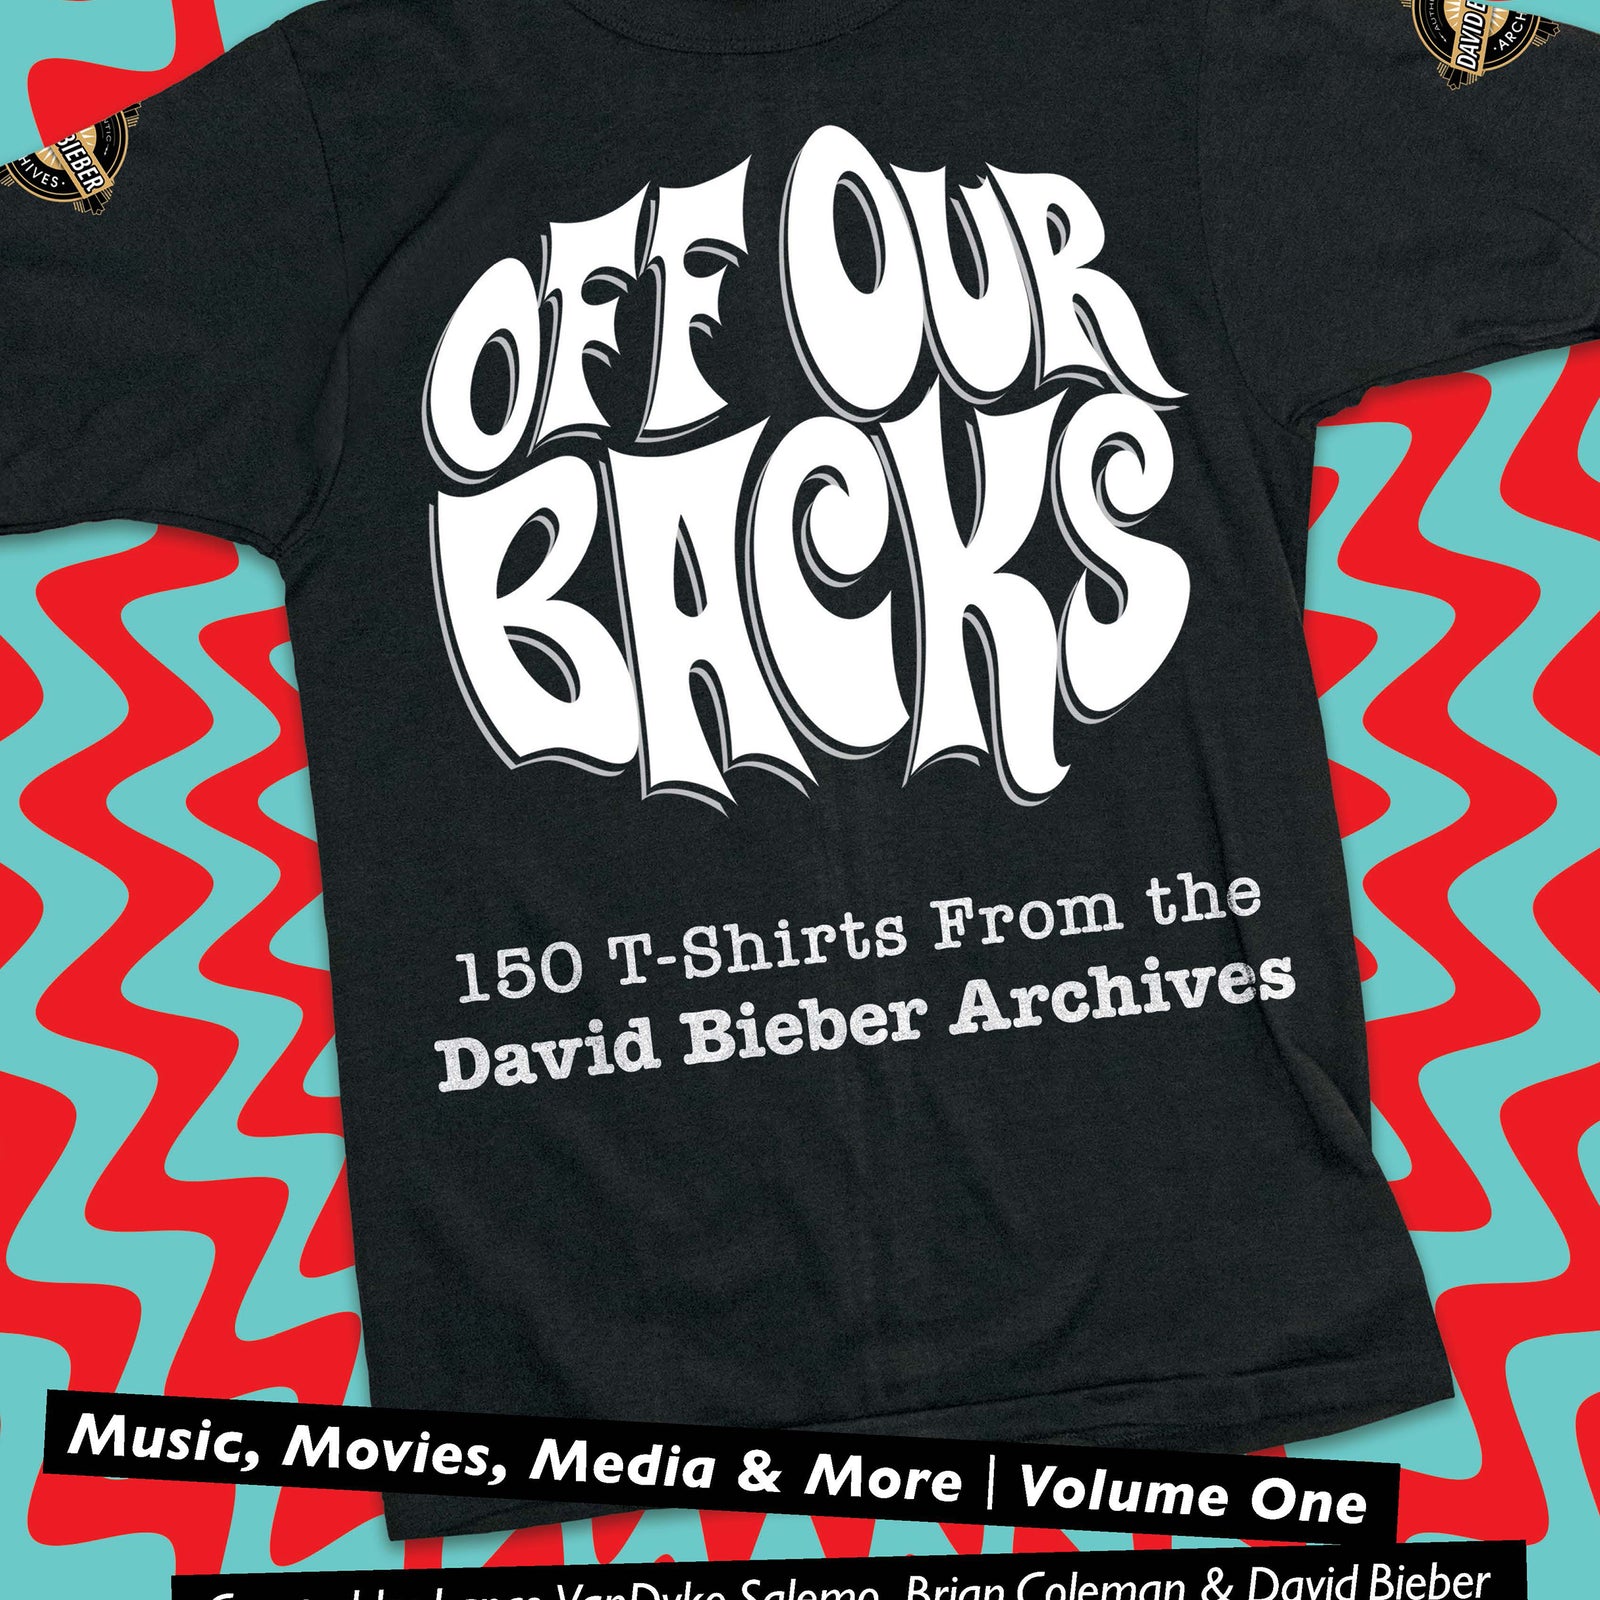 Off Our Backs, Volume 1: Music, Movies, Media & More